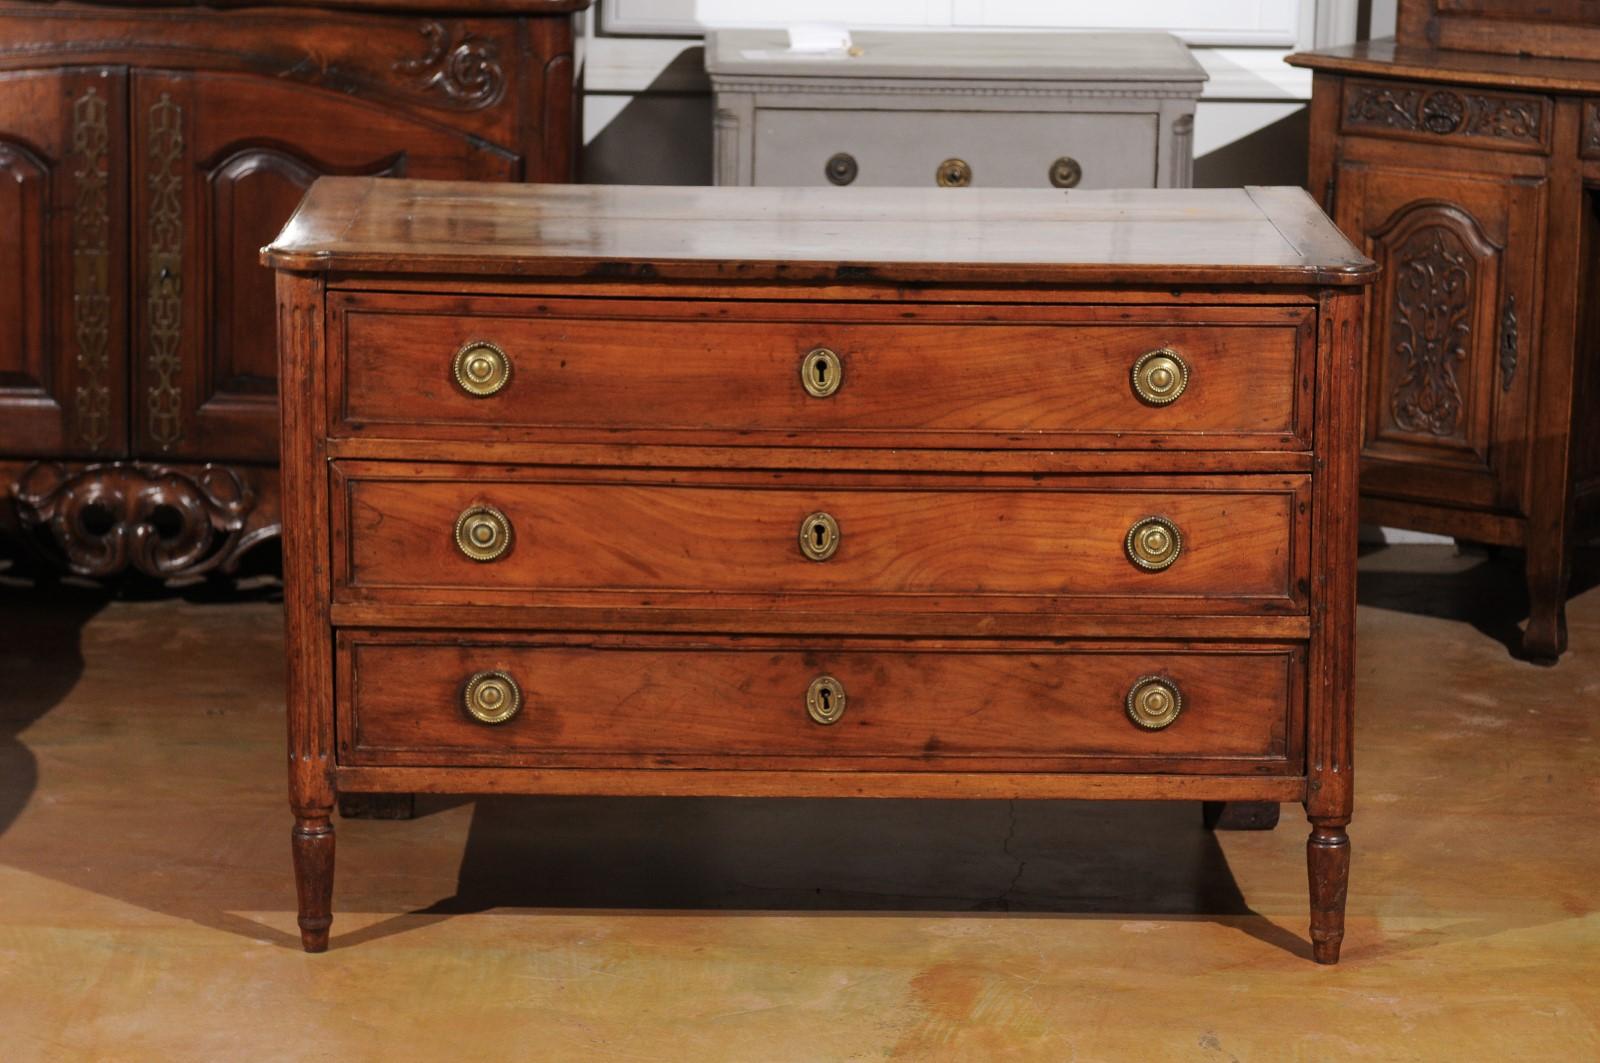 A French Louis XVI period walnut commode from the 18th century, with three drawers and fluted accents. Born in France during the early years of the reign of King Louis XVI, this walnut commode features a rectangular planked top with rounded corners